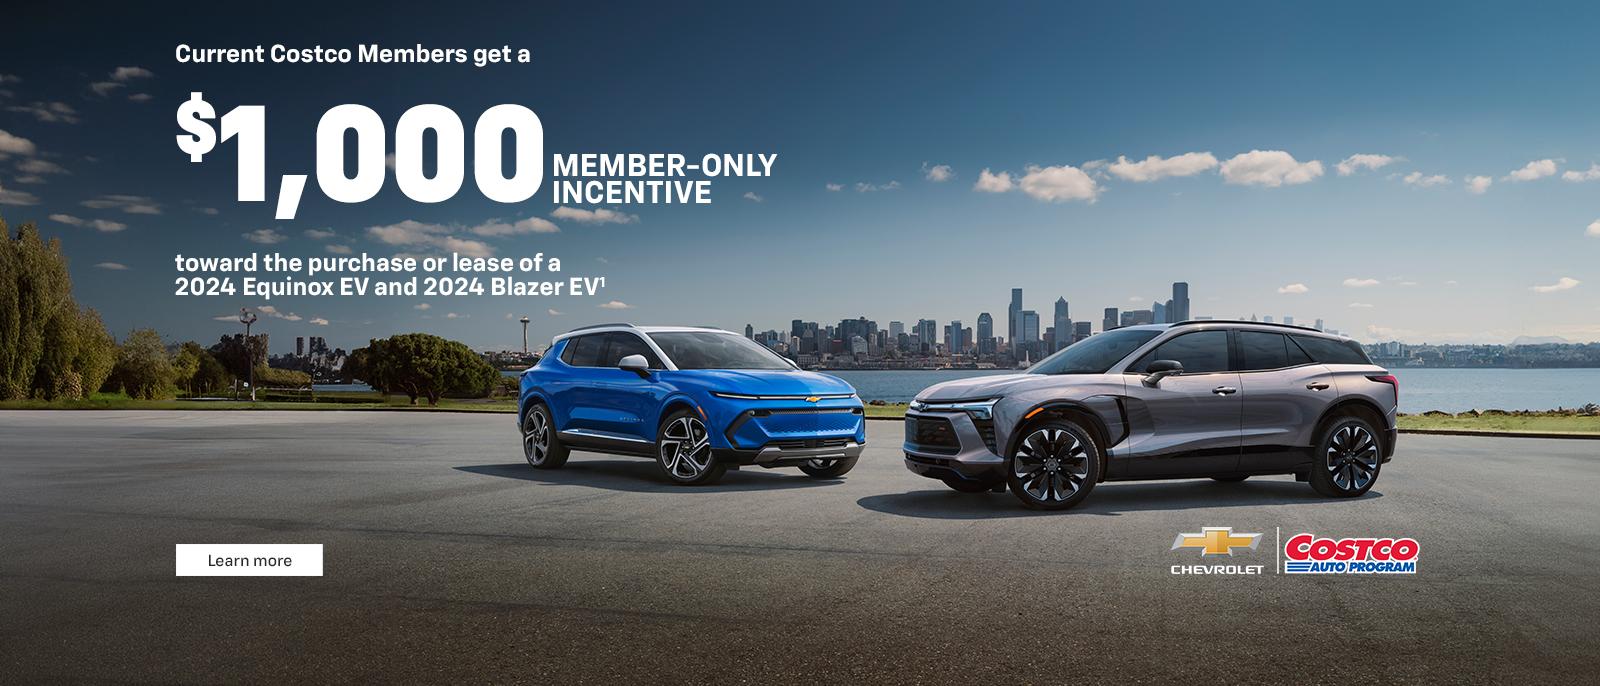 2024 Chevy Equinox EV. 2024 Chevy Blazer EV. Current Costco members get a $1,000 member-only incentive toward the purchase or lease of a 2024 Equinox EV and Blazer EV.